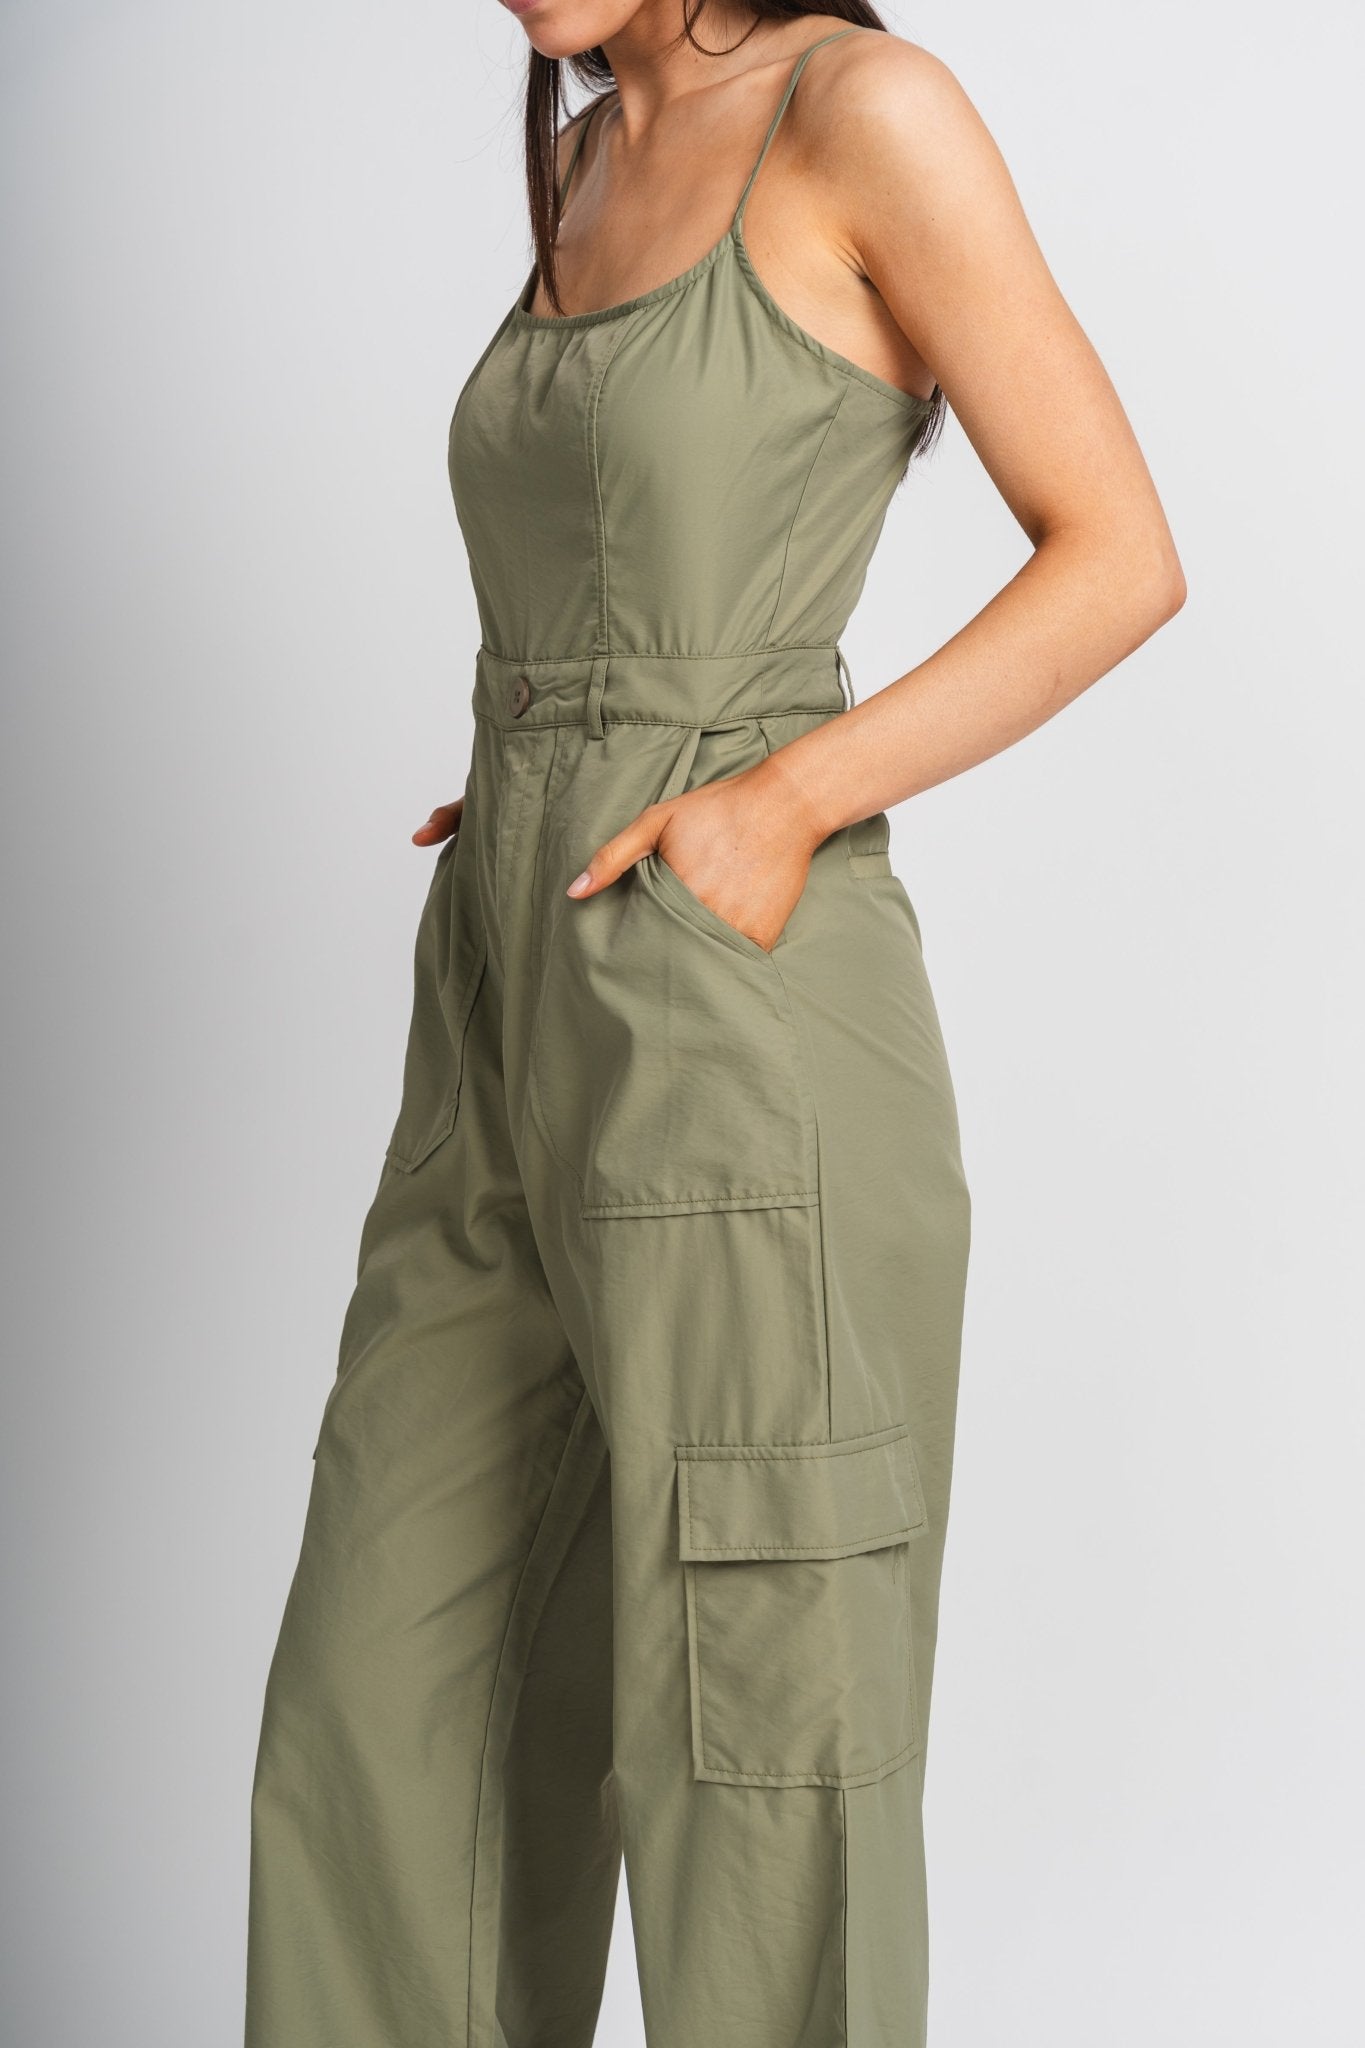 Cargo jumpsuit light olive - Trendy jumpsuit - Fashion Rompers & Pantsuits at Lush Fashion Lounge Boutique in Oklahoma City